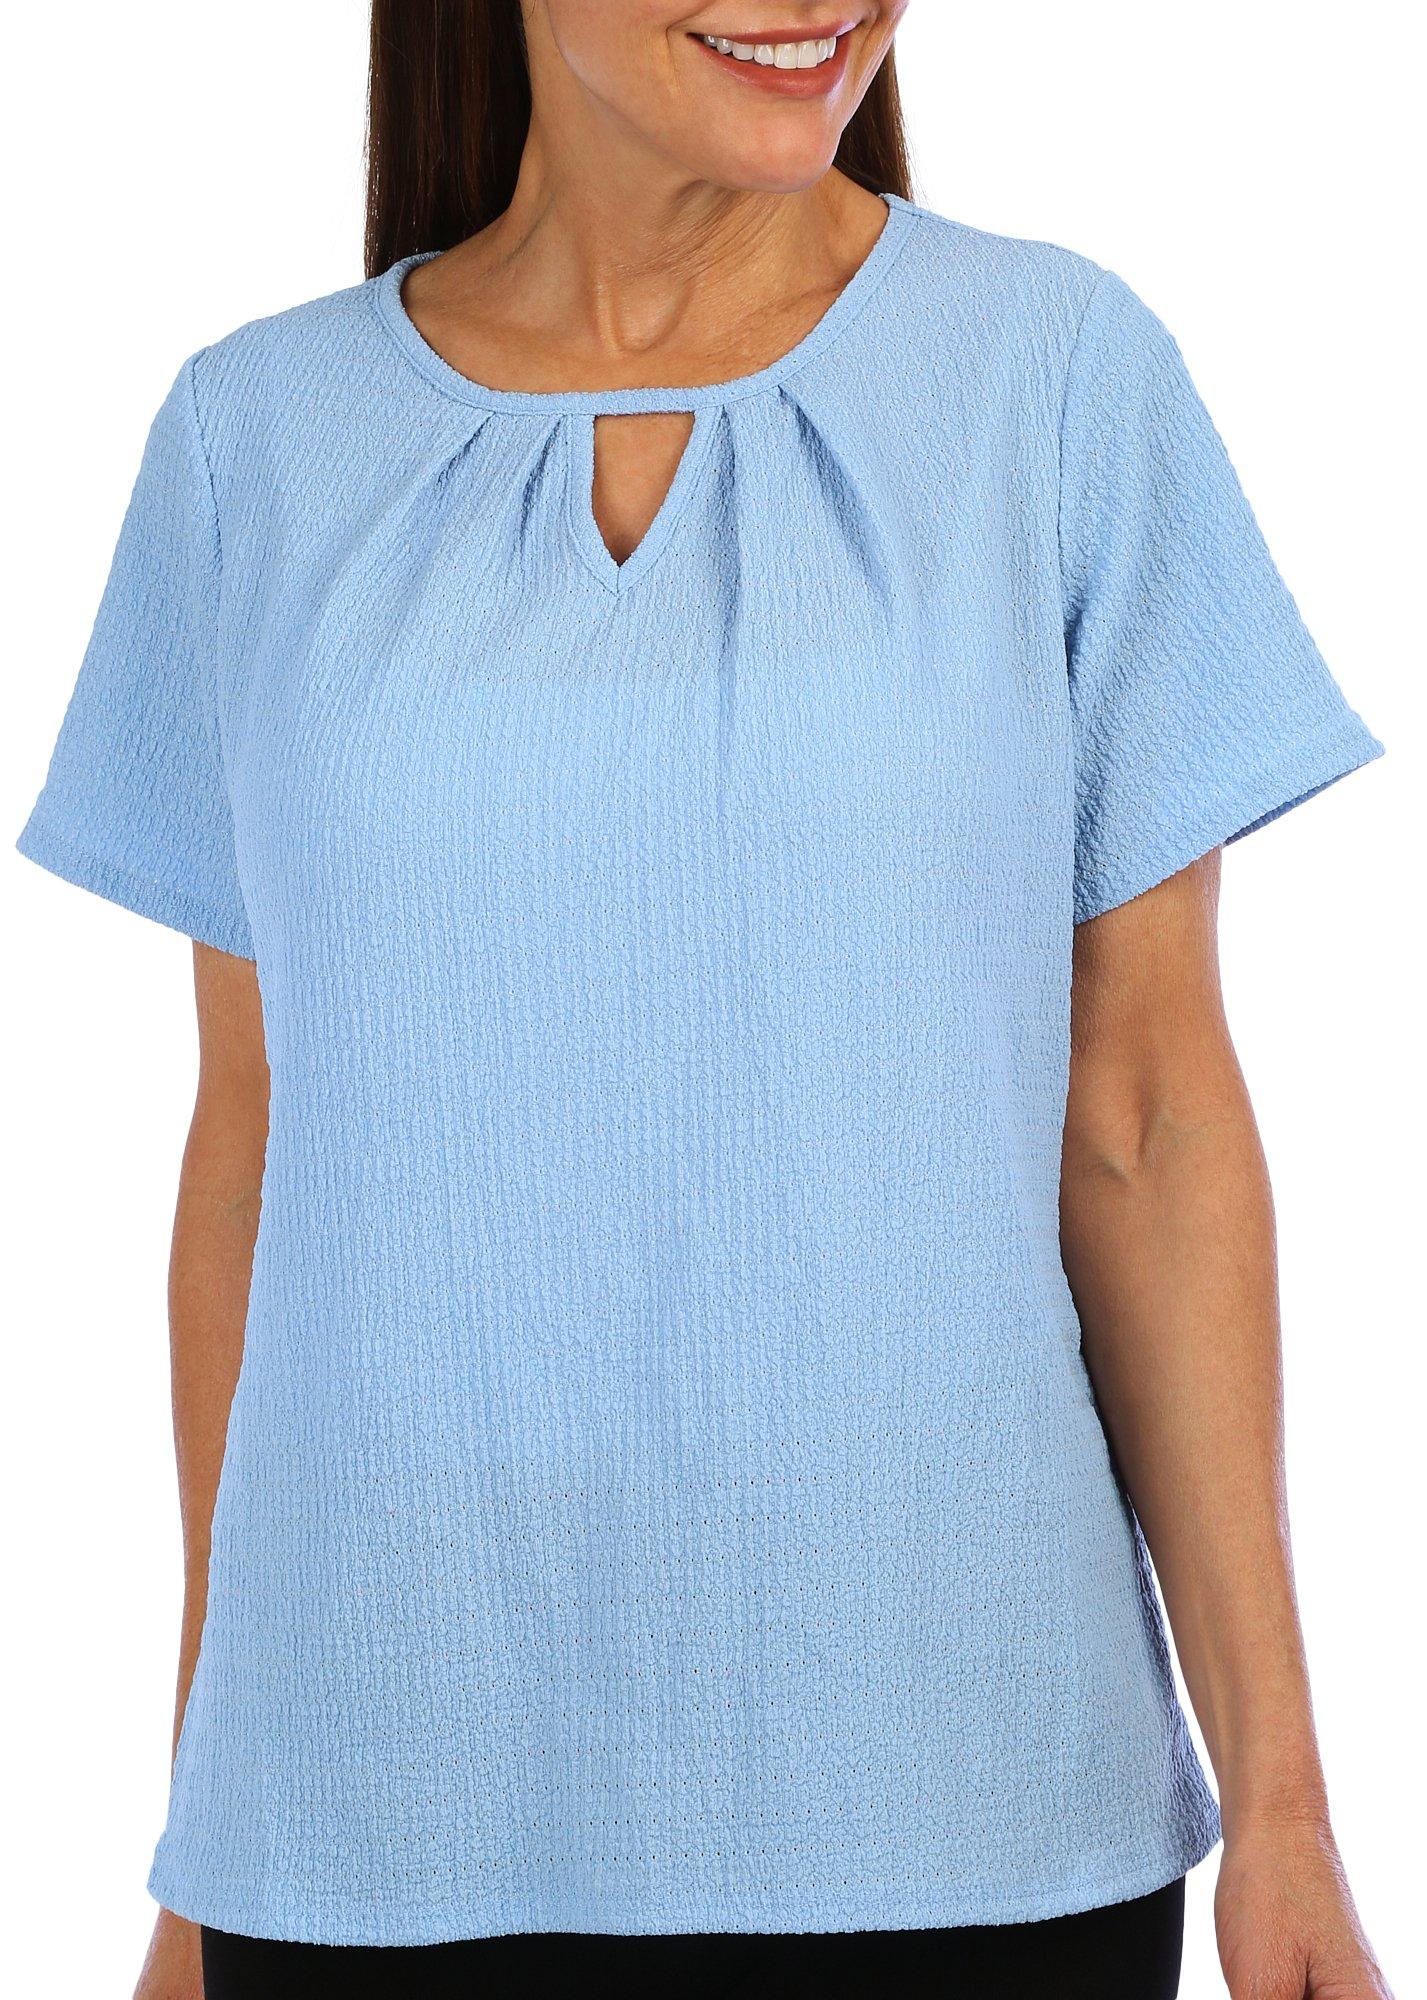 Women's Solid Keyhole Front Top